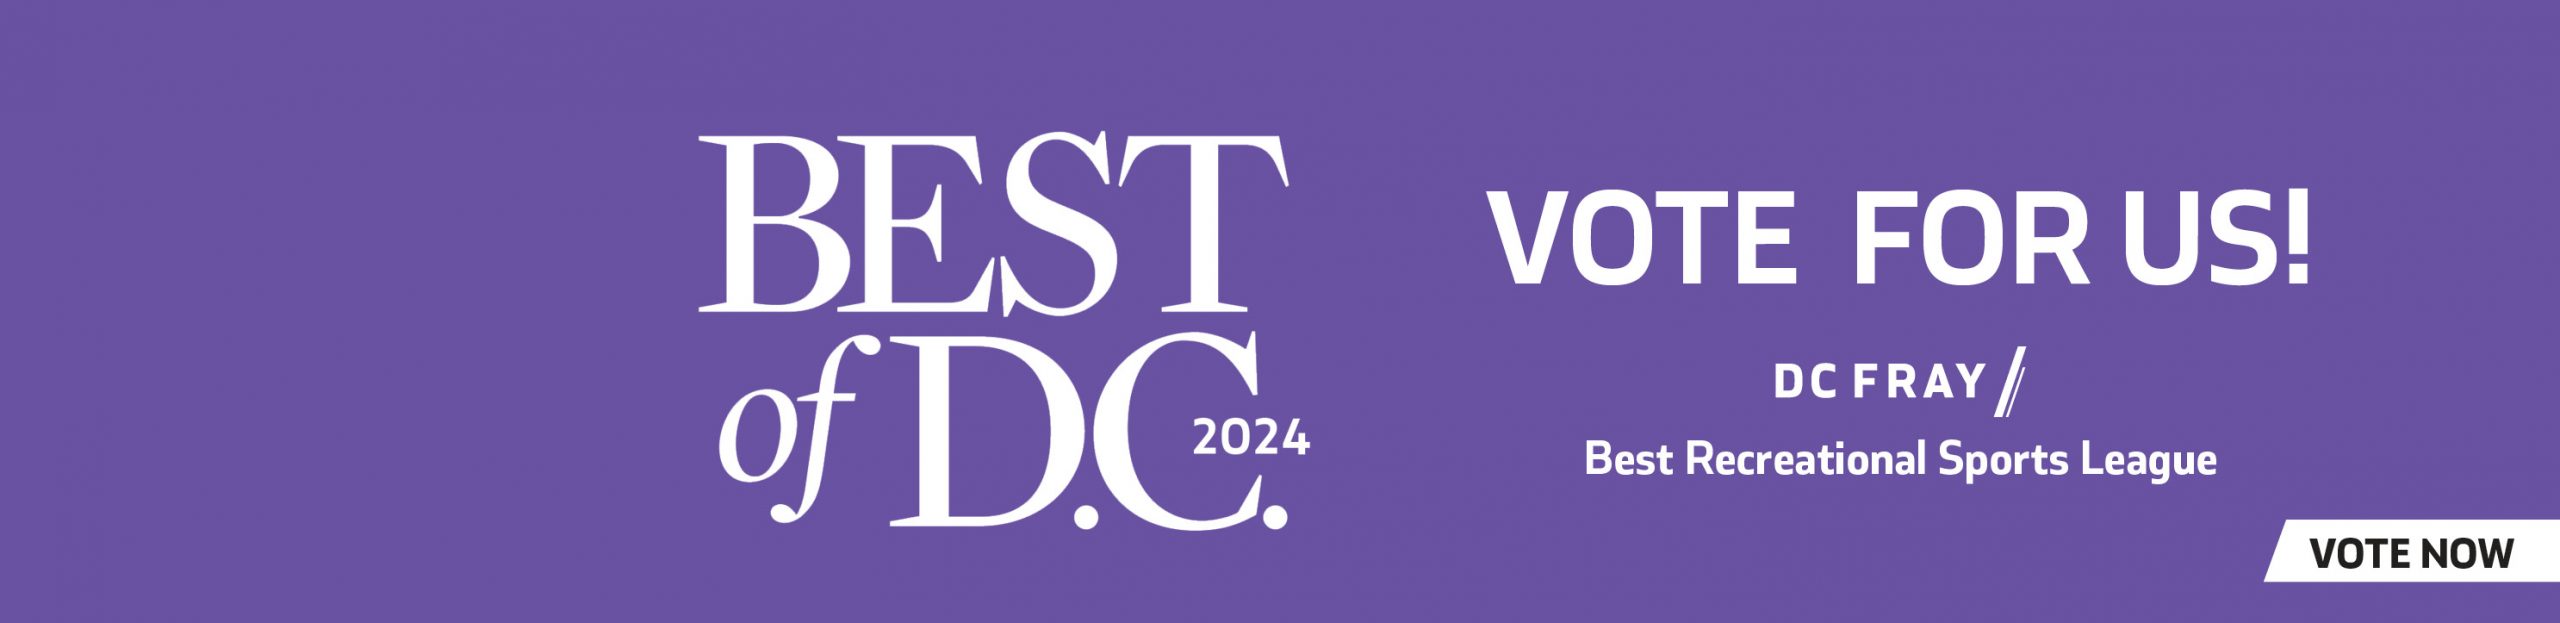 Best of D.C. - Vote For Us!